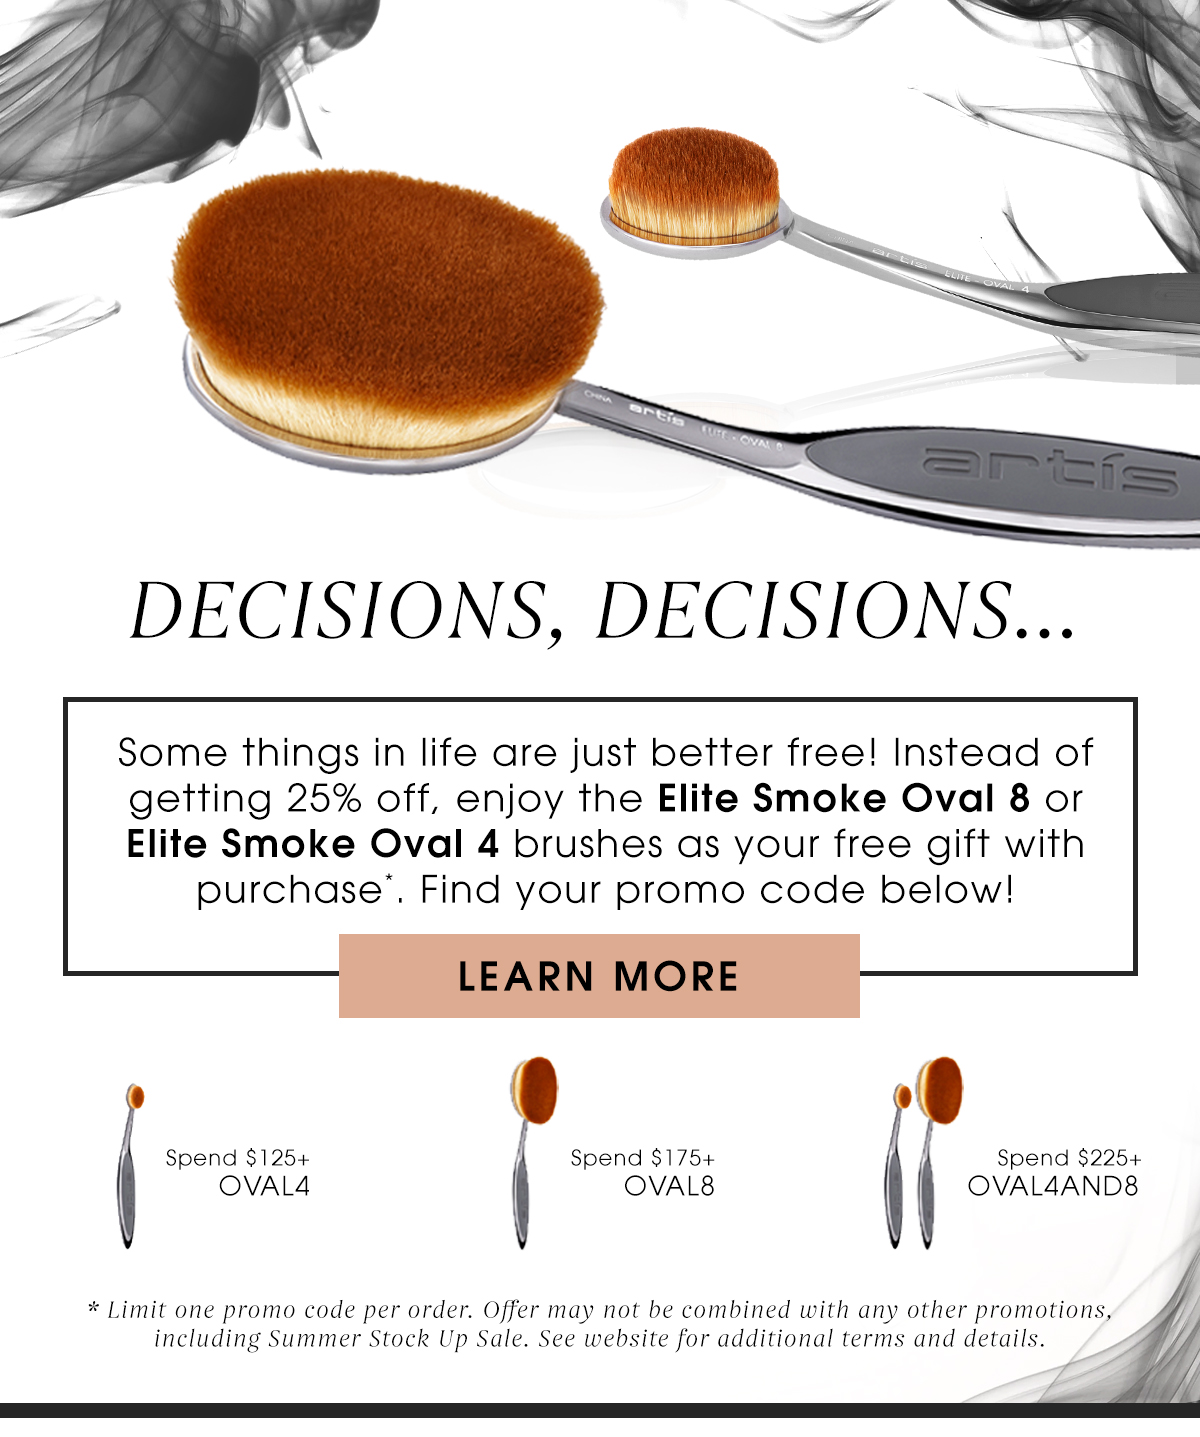 Enjoy the Elite Smoke Oval 4 and Oval 8 as gift with purchases. LEARN MORE.